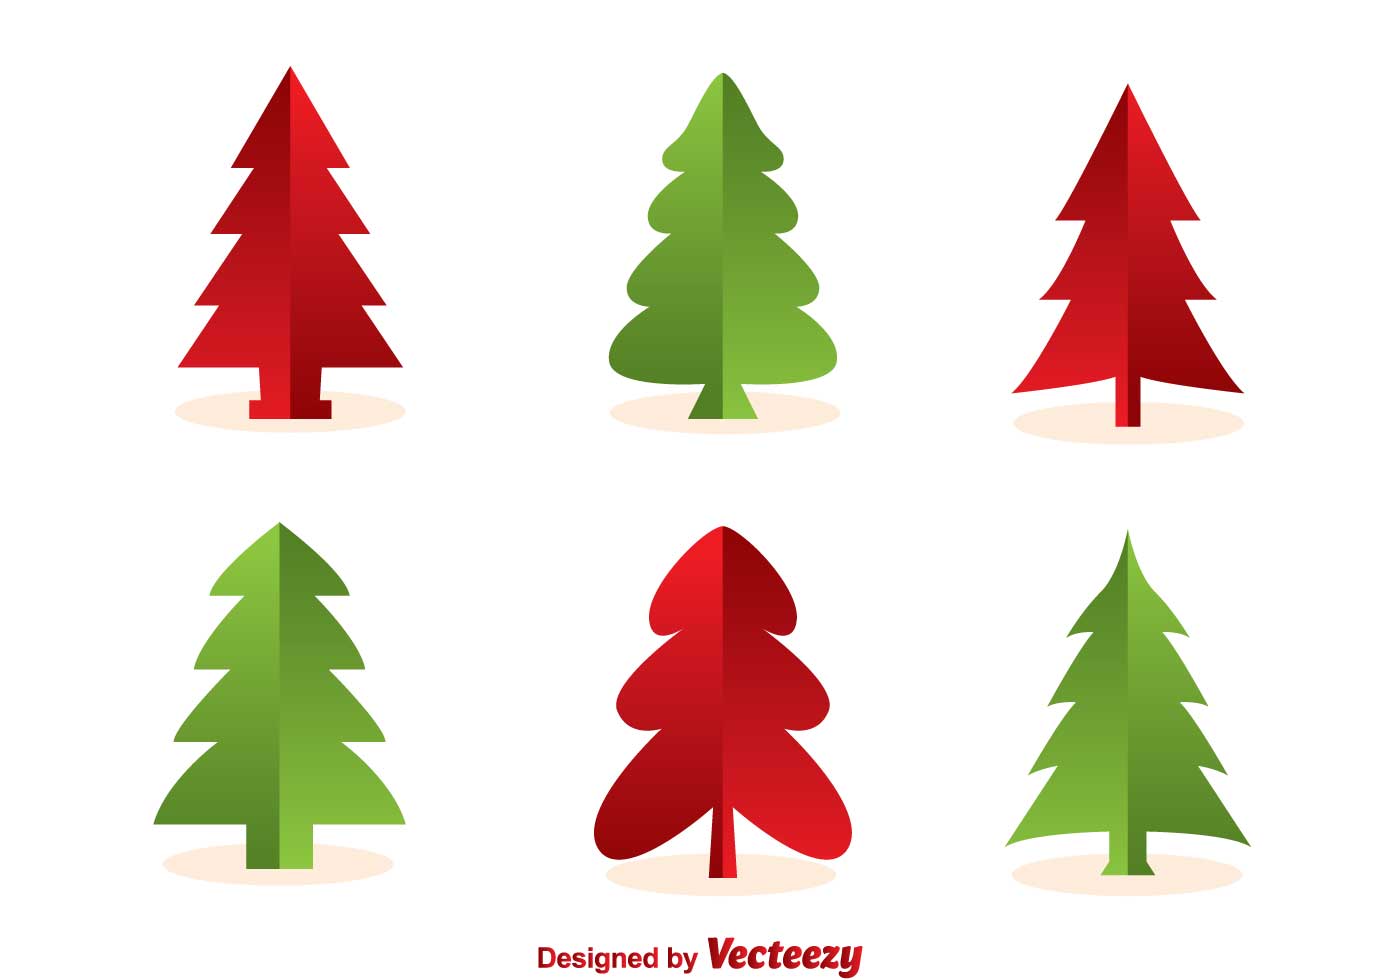 Christmas Tree Silhouette Free Vector Art - (11573 Free Downloads)